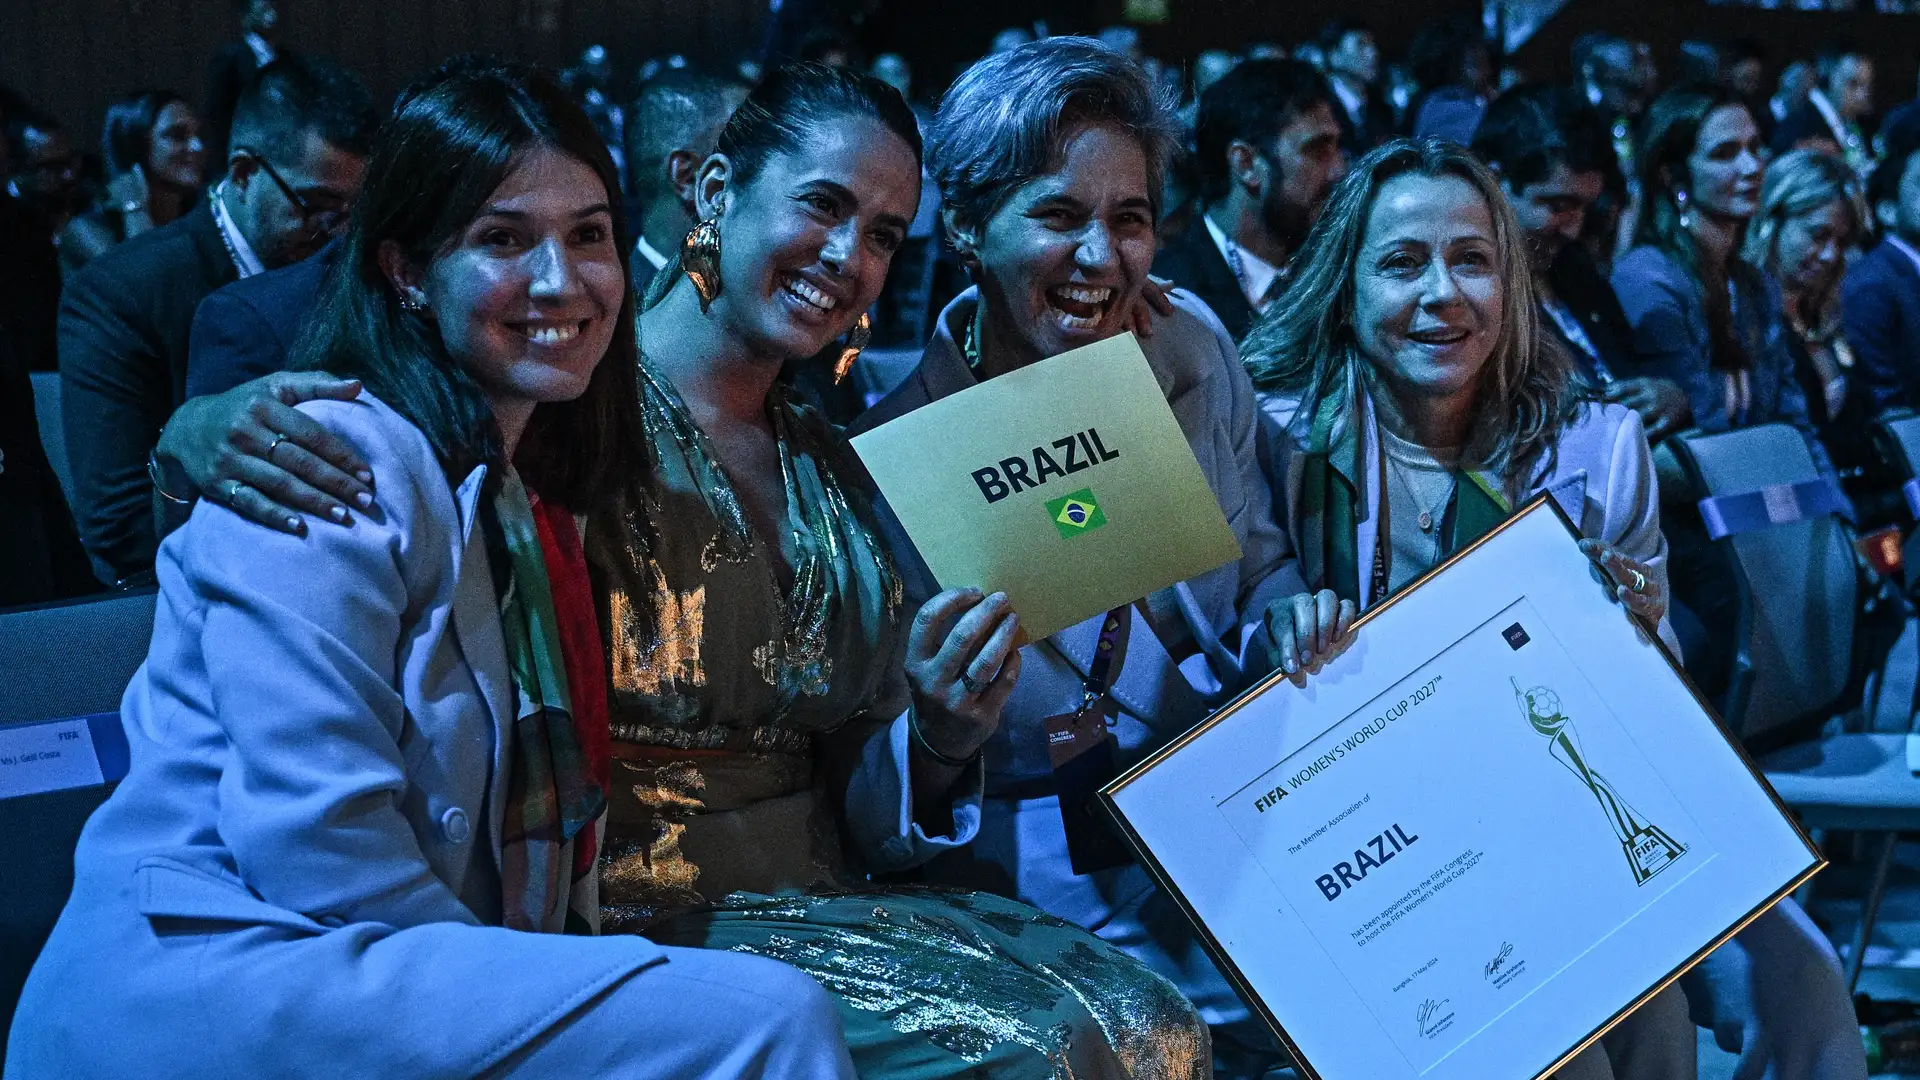 VIDEO: Brazil will host the 2027 Women's World Cup! Netherlands, Belgium and Germany lose vote as bid team explode in excitement